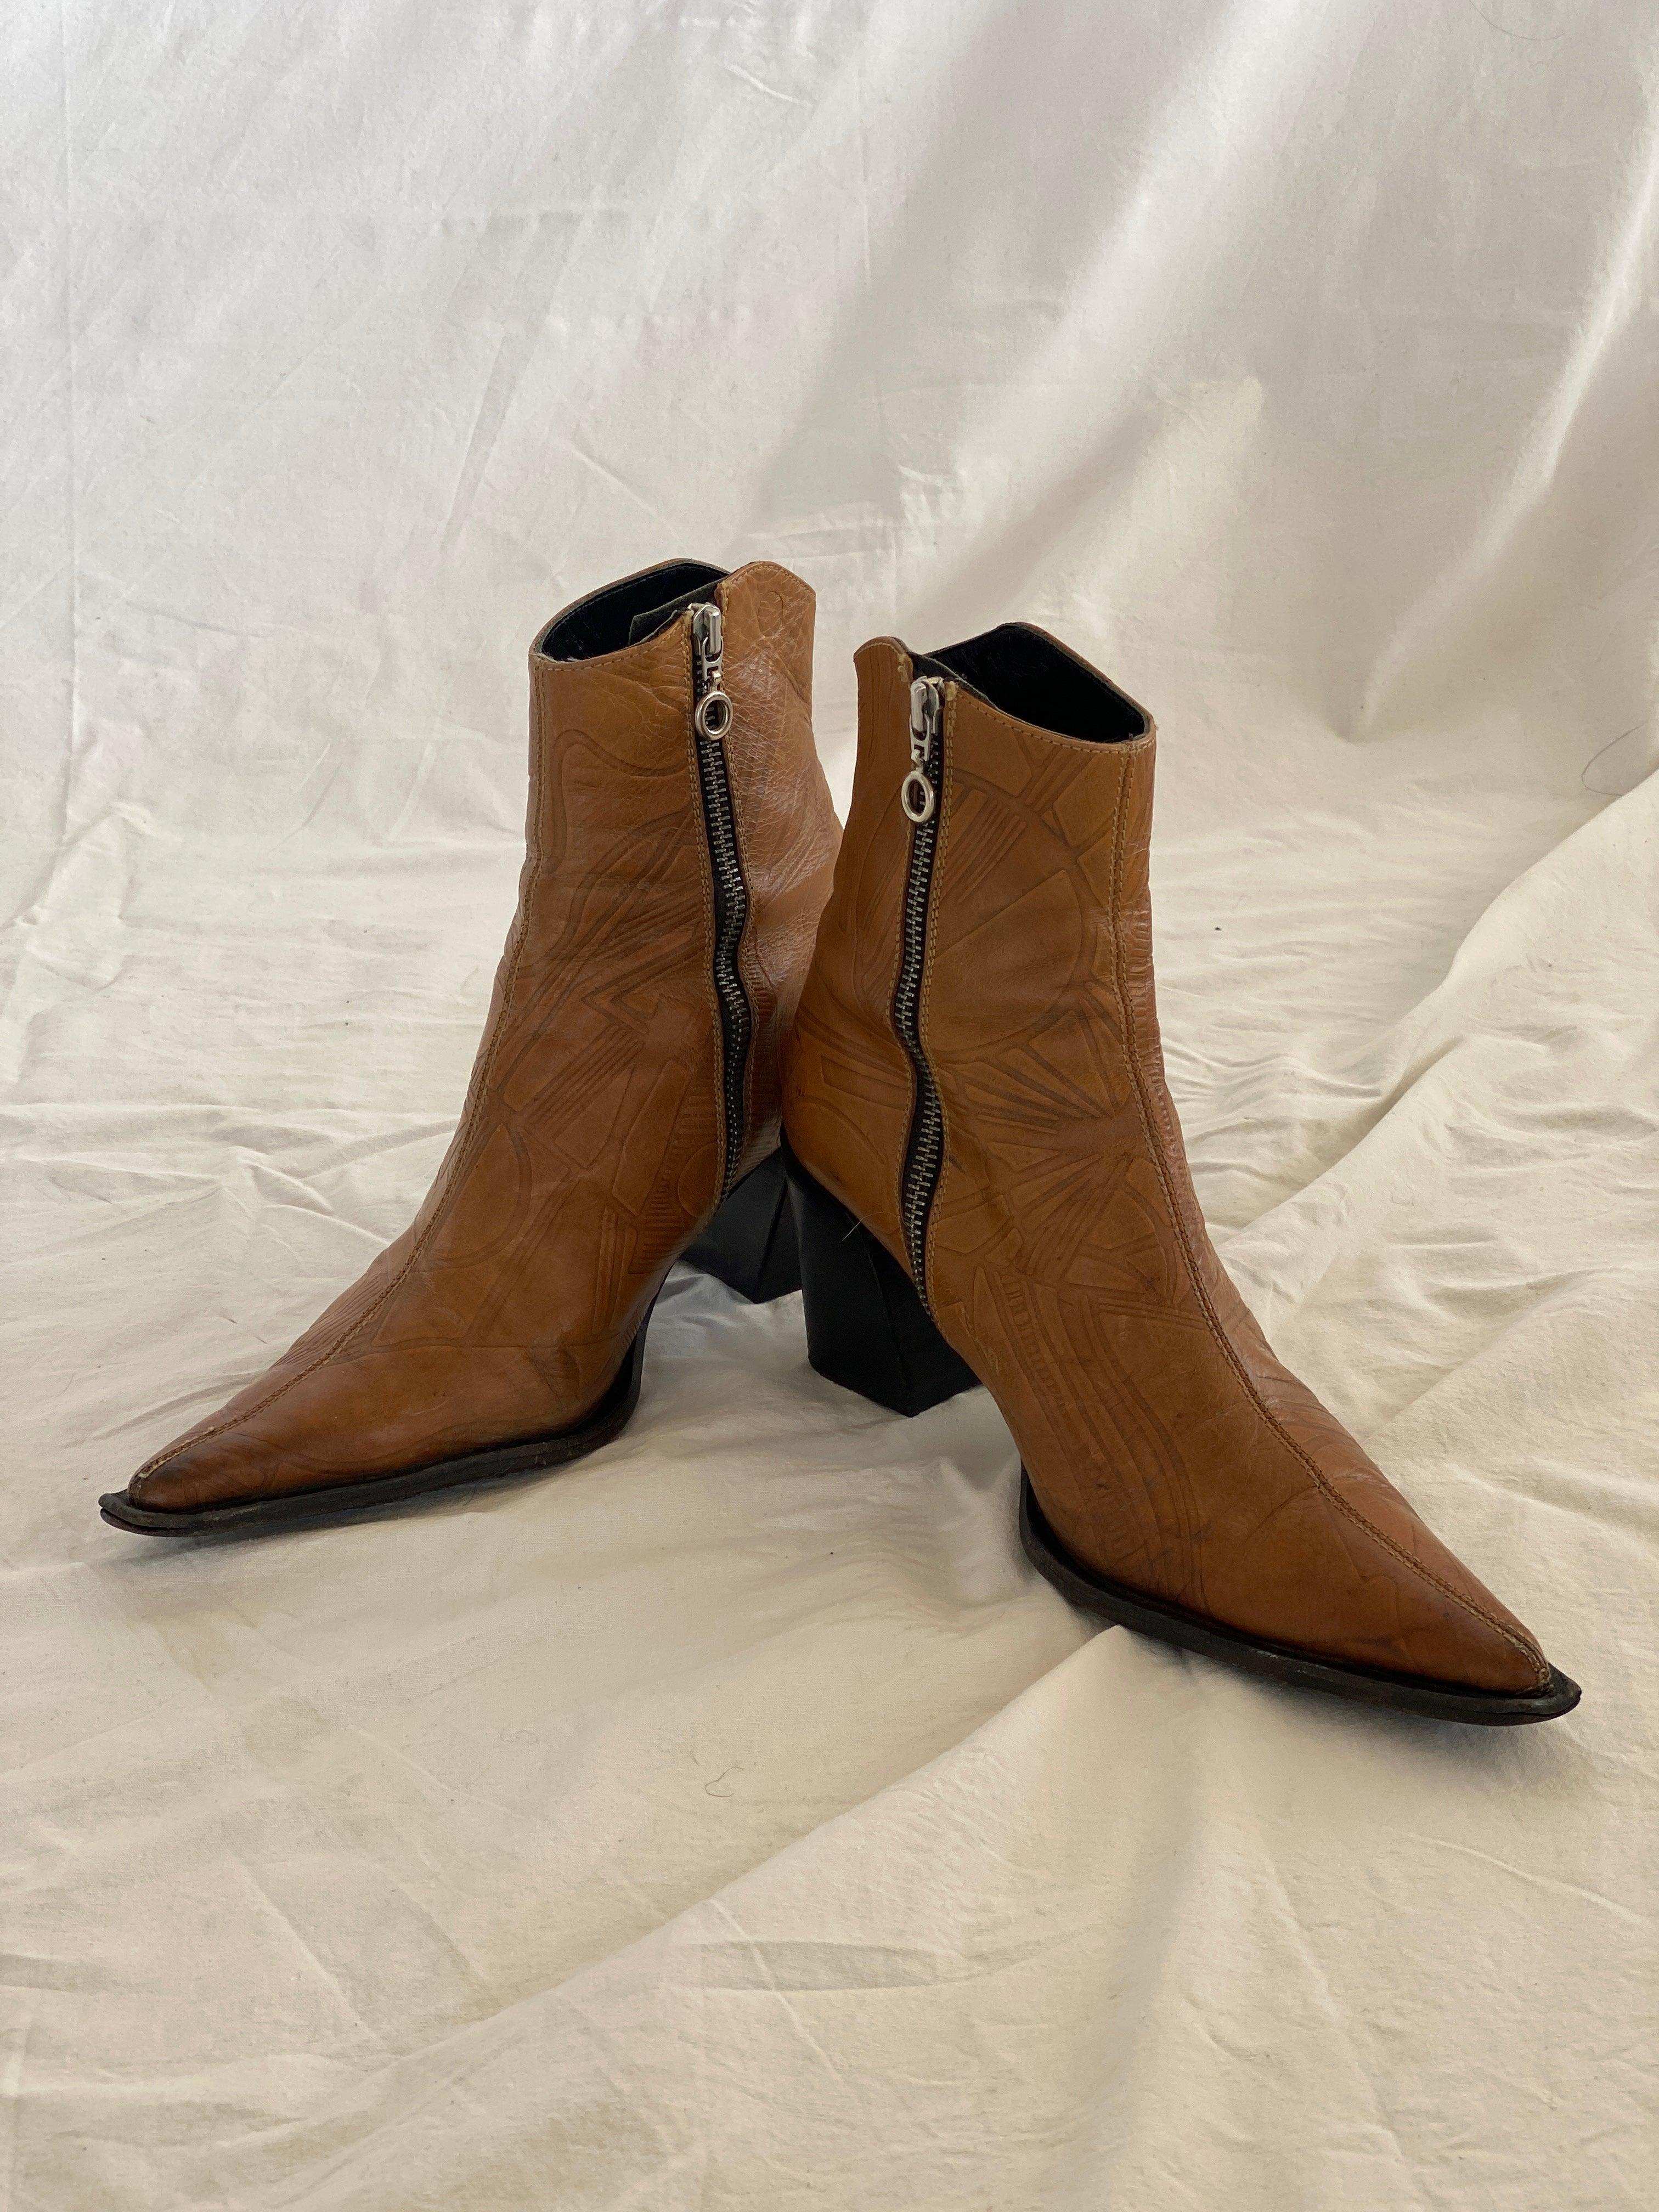 Vintage Simon Bay Genuine Leather Cowboy Boots - Balagan Vintage Cowboy boots 90s, cowboy, cowboy boots, genuine leather, NEW IN